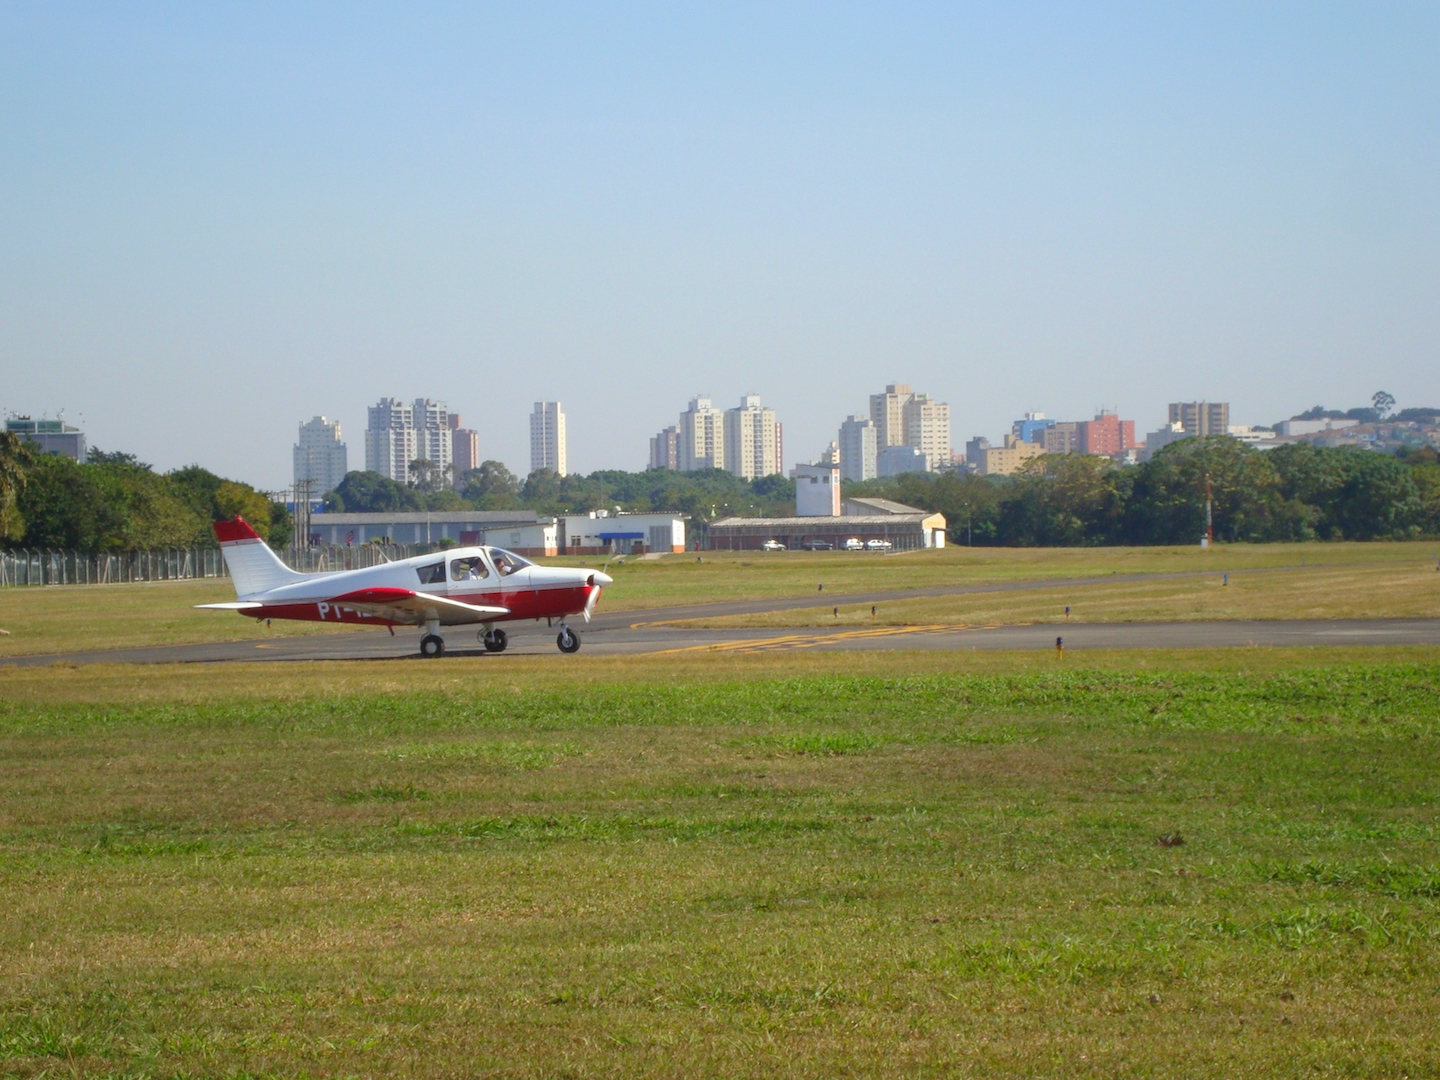 Brazil,Campo de Marte airstrip is the largest airstrip in São Paulo city